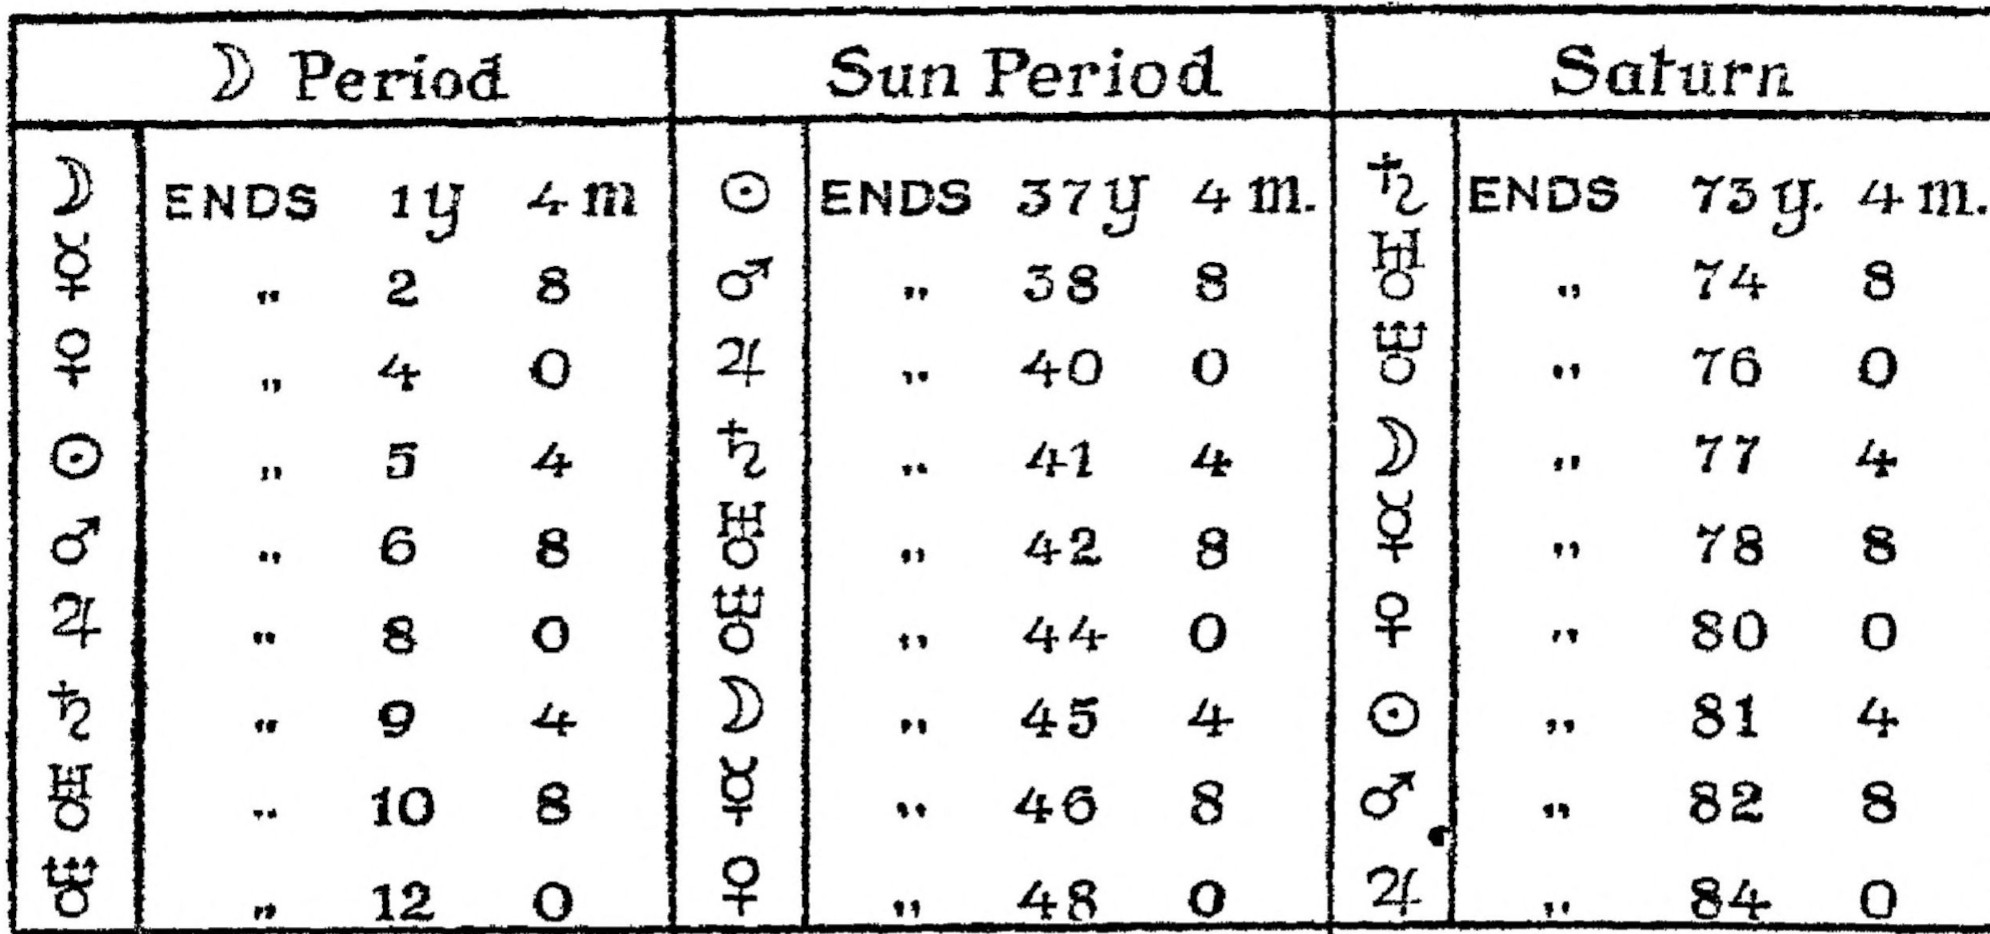 Figure 22-a. Planetary Periods by Sepharial.